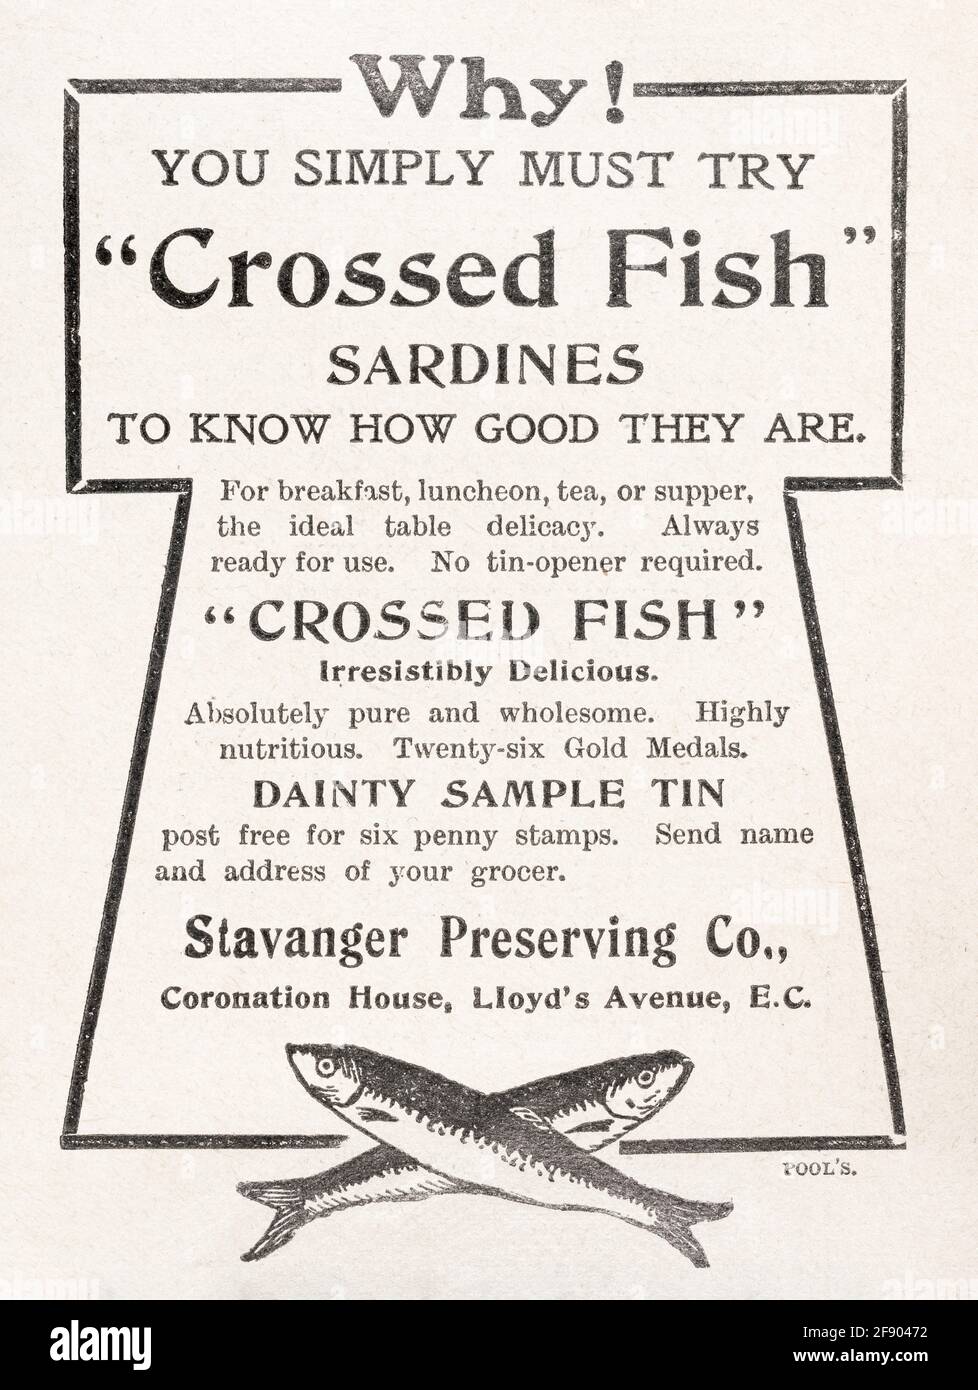 Old vintage Victorian tinned sardines magazine advert from 1907 - pre advertising standards. Old food Victorian advertising, old food product adverts Stock Photo